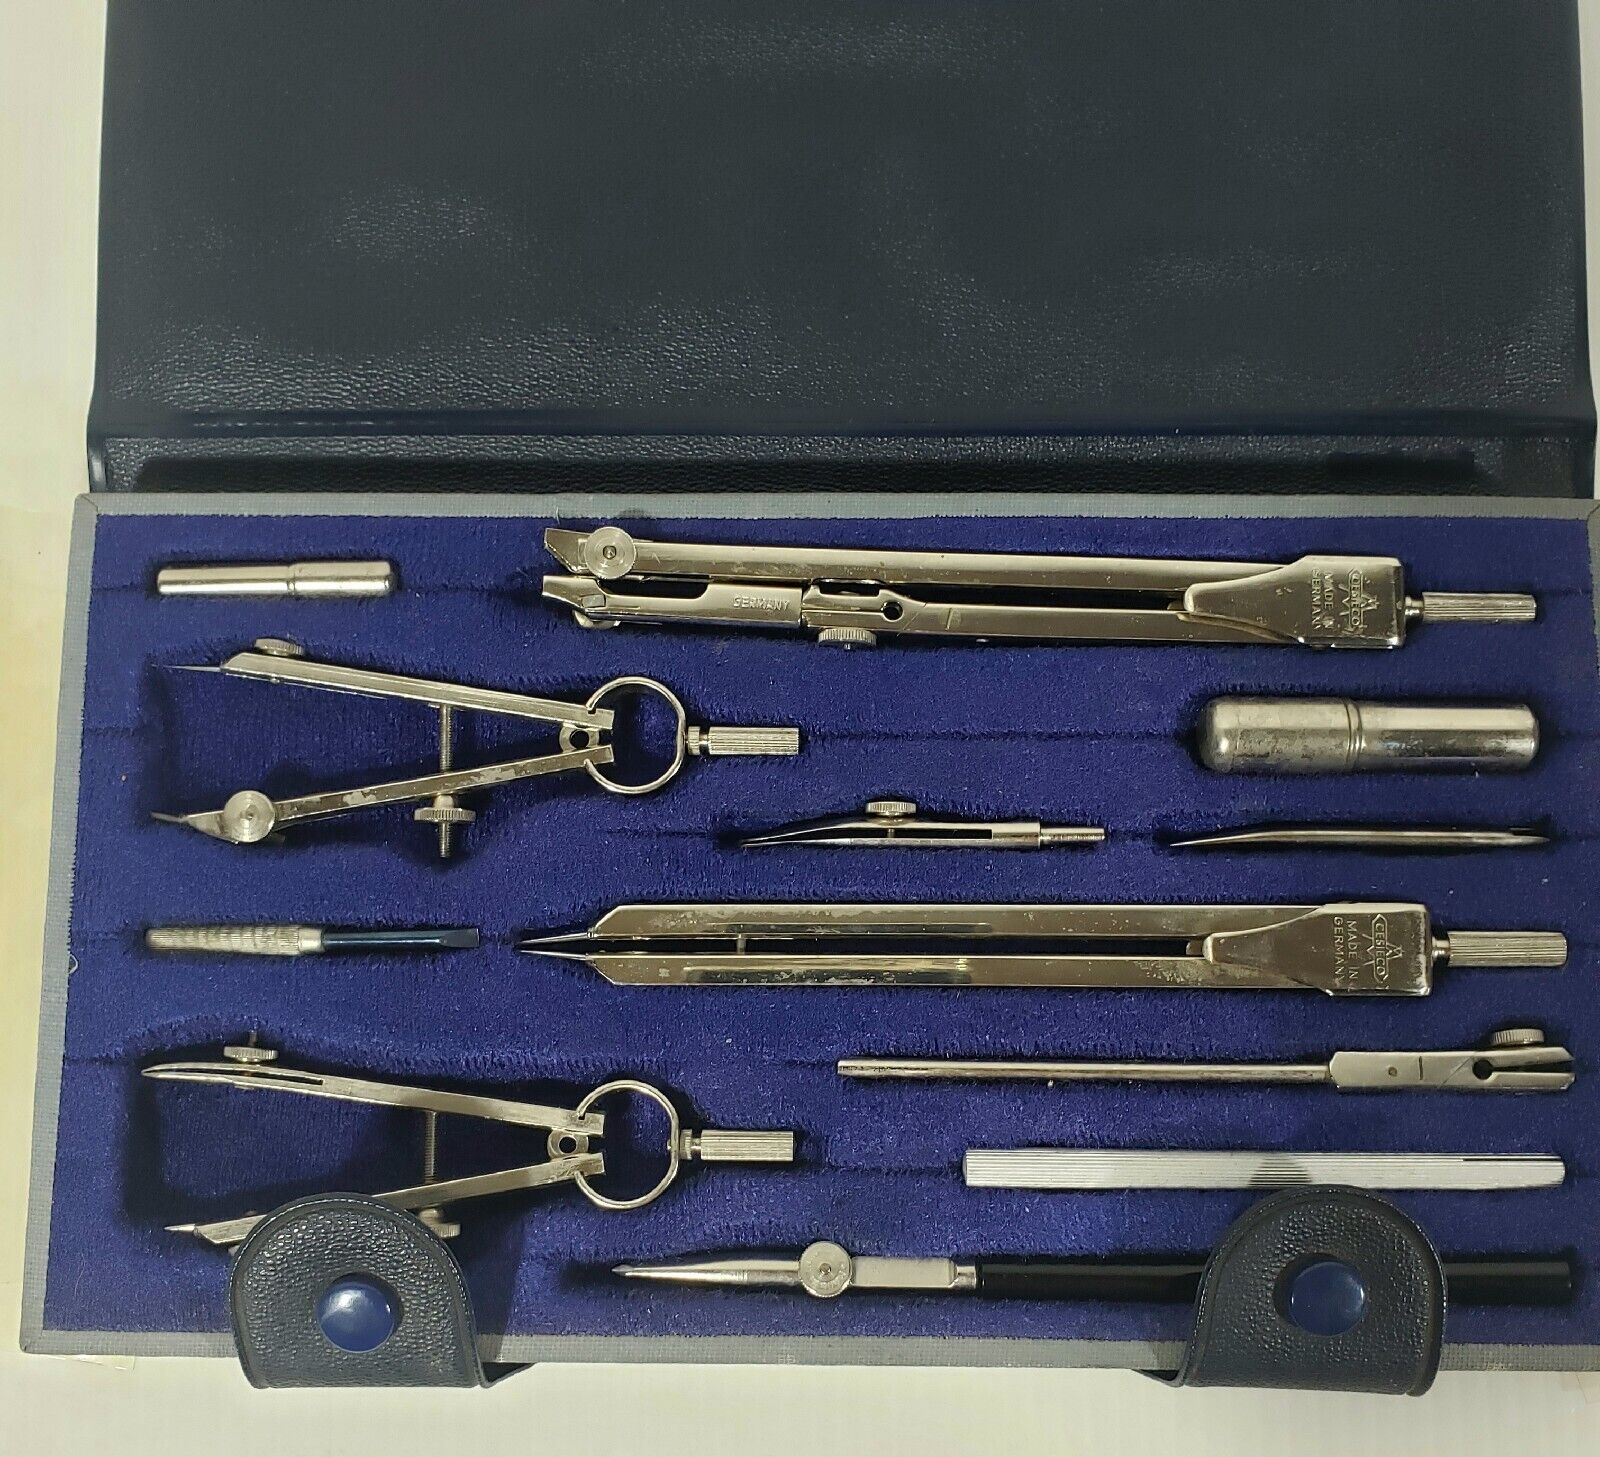 Vintage CESIECO Germany, Precision Drafting Drawing Engineering Compass Tool Set